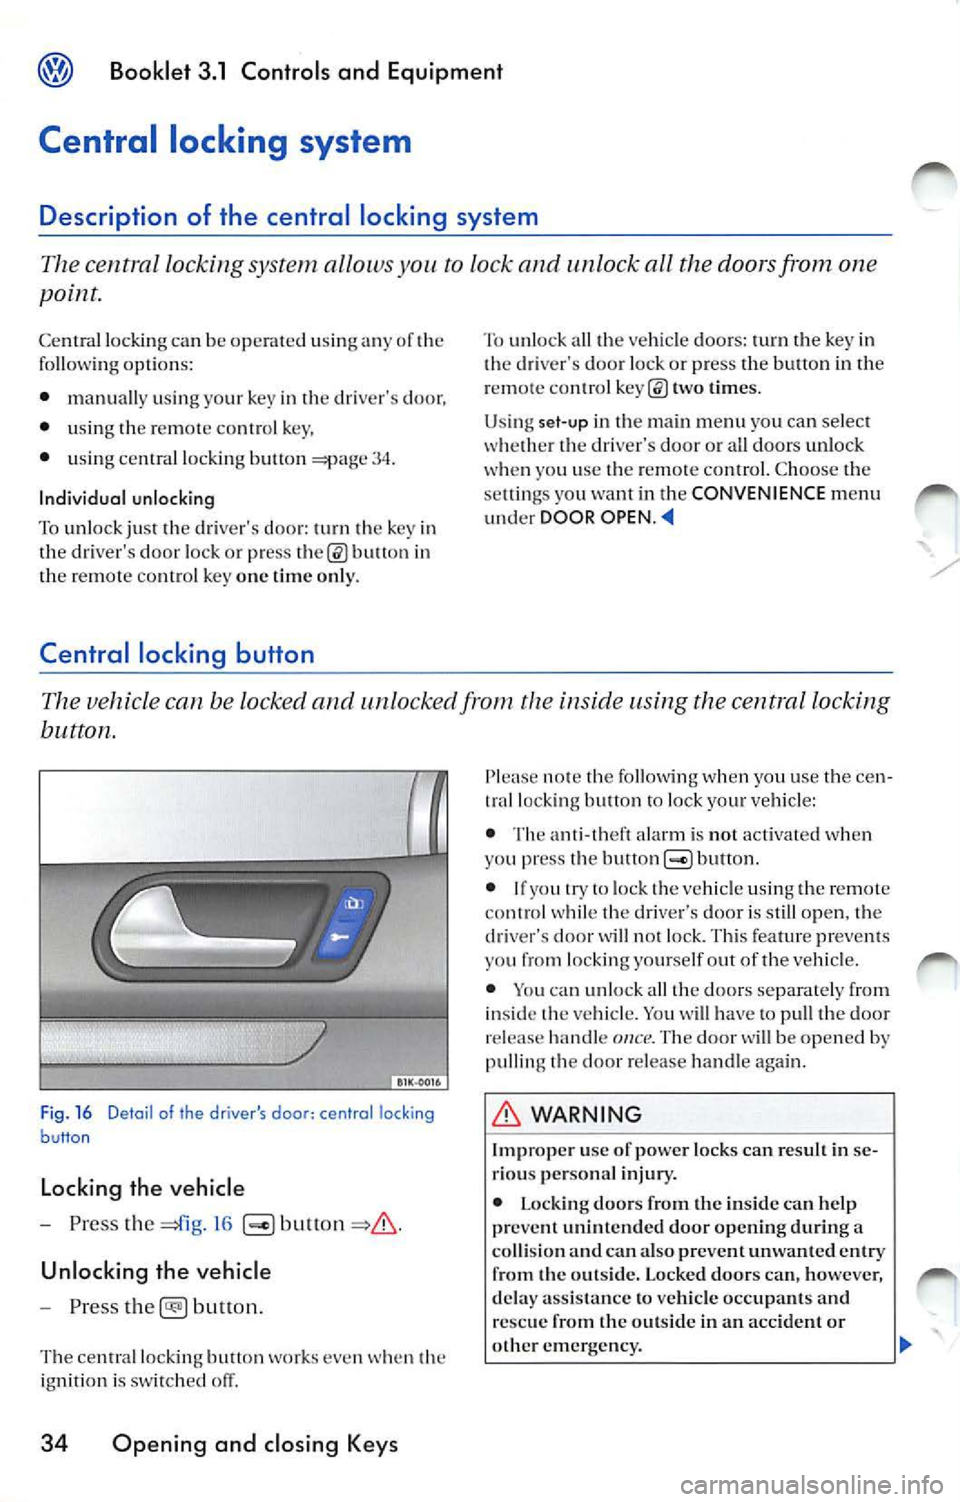 VOLKSWAGEN JETTA 2010  Owners Manual Booklet  3.1  Controls  and  Equipment 
Central  locking  system 
Description  of  the  central  locking  system 
The central  locking  system allows you to lock and unlock  all  the doors from  one 
